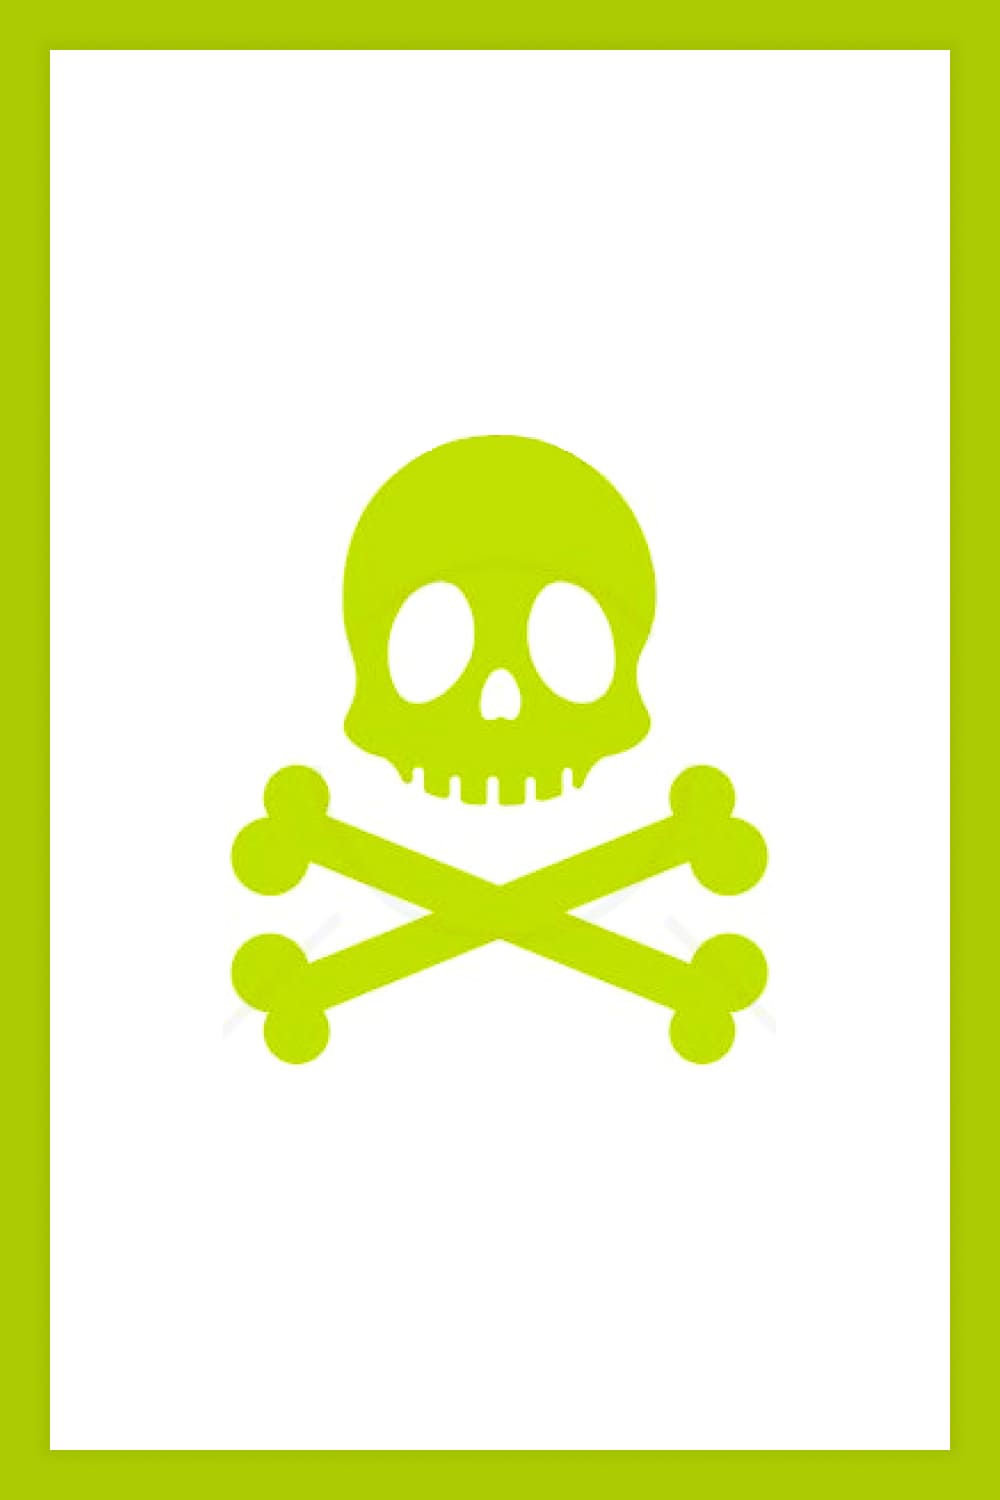 Schematic representation of the skull and crossbones in light green.